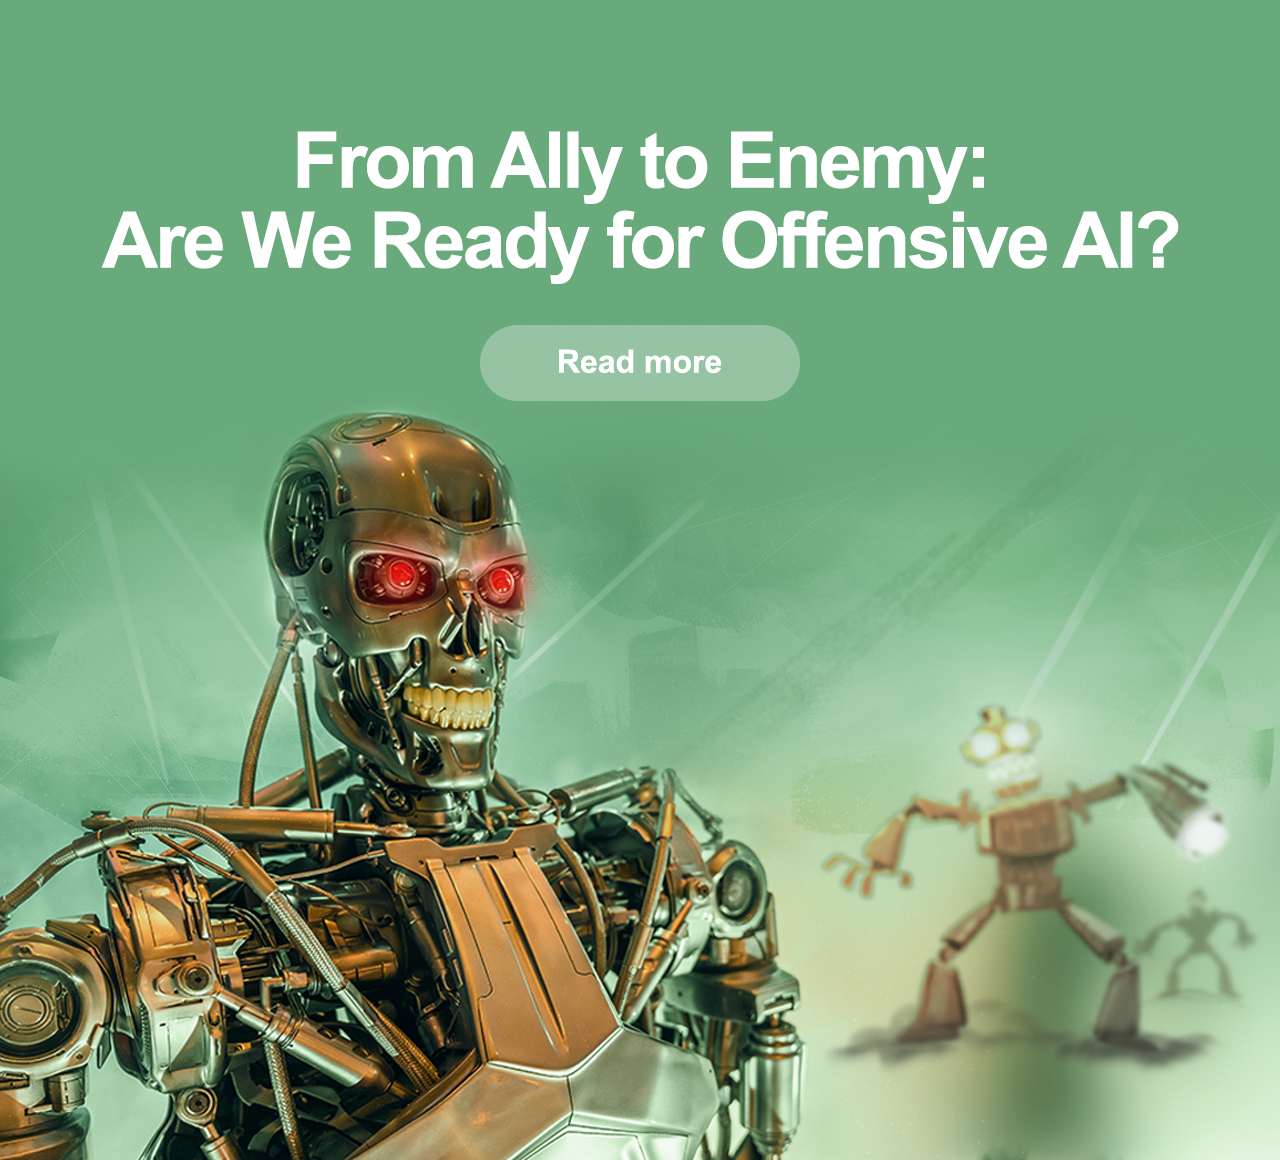 From Ally to Enemy: Are We Ready for Offensive AI?